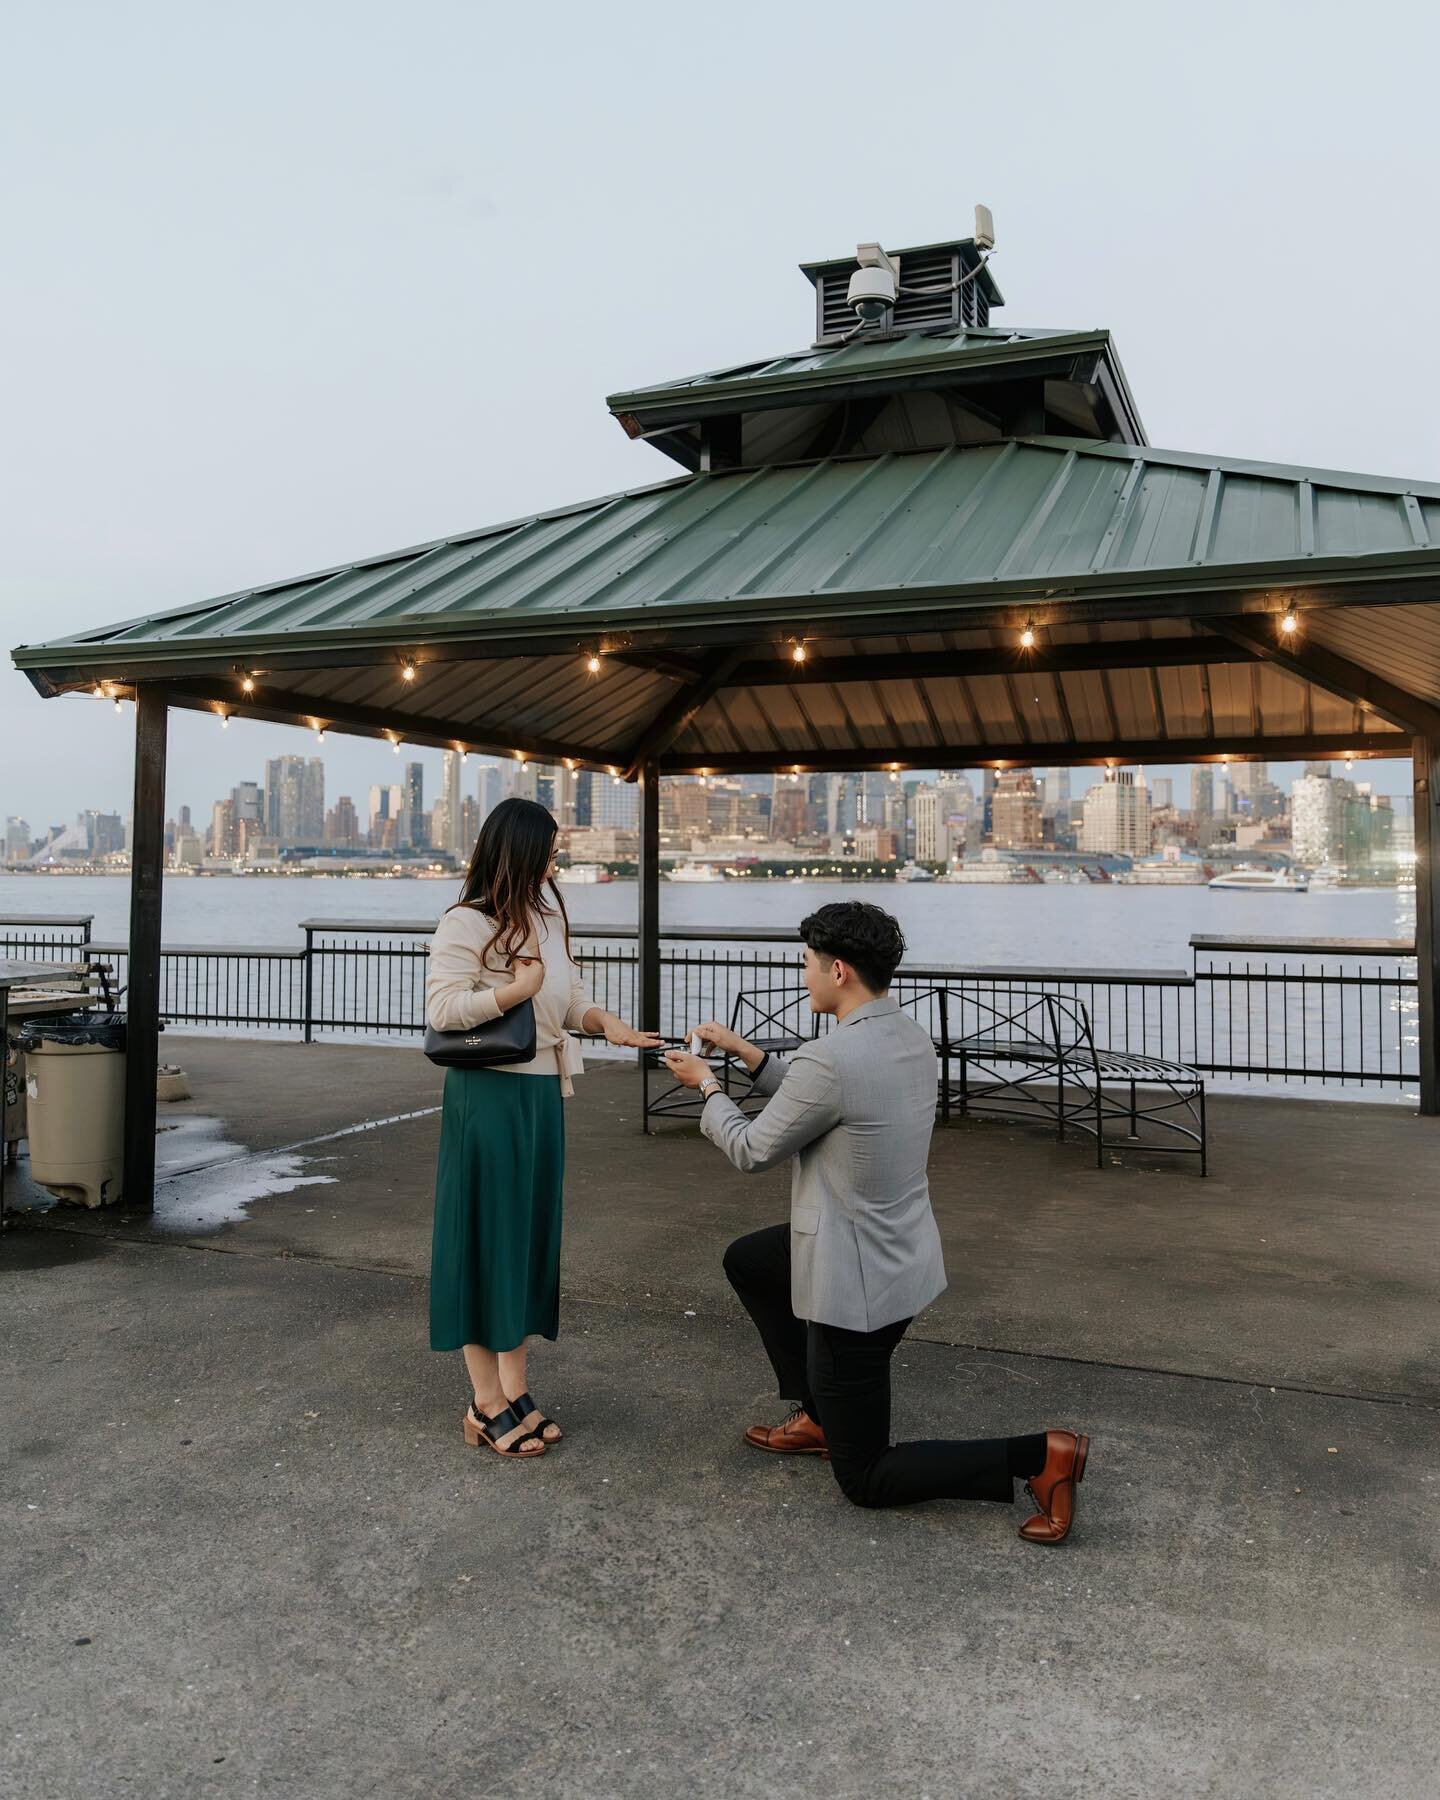 if only you knew how much effort john put into planning this day for hanna 🥹 (hint: yes, he made sure to set up string lights on the pier where they had their first date. yes, he invited all of their friends to witness the proposal. and yes, he plan